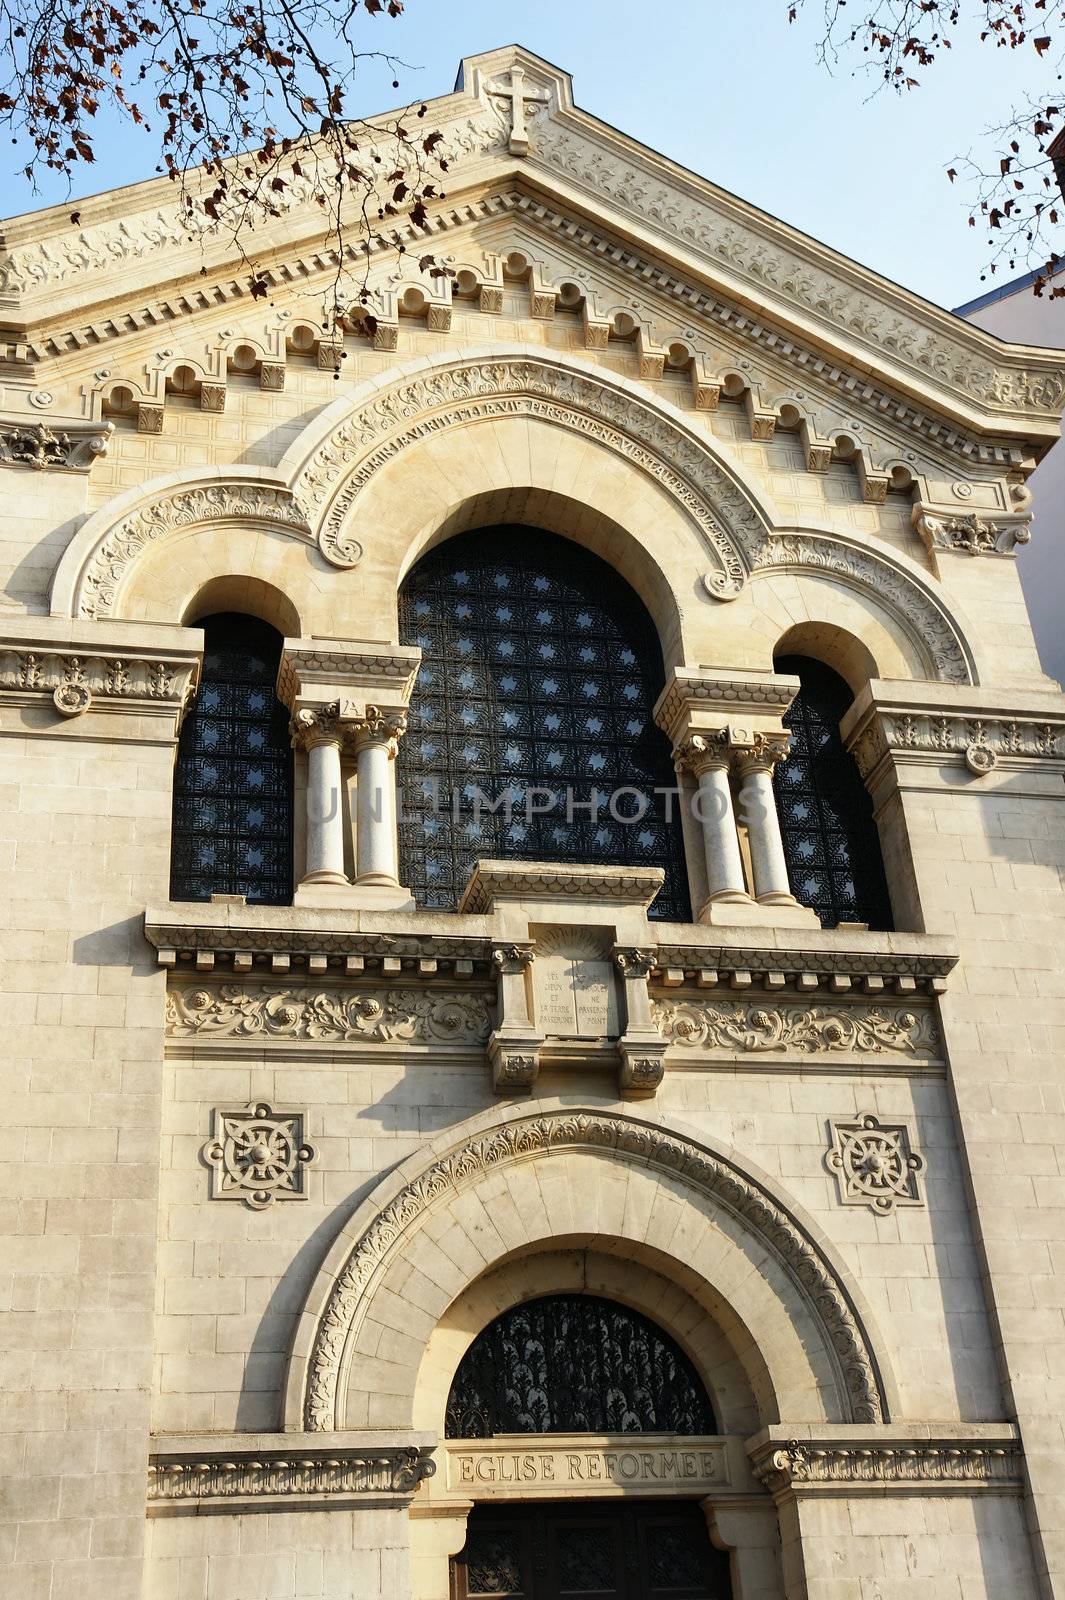 Beautiful French Reformed church facade with stone architecture and lots of details.